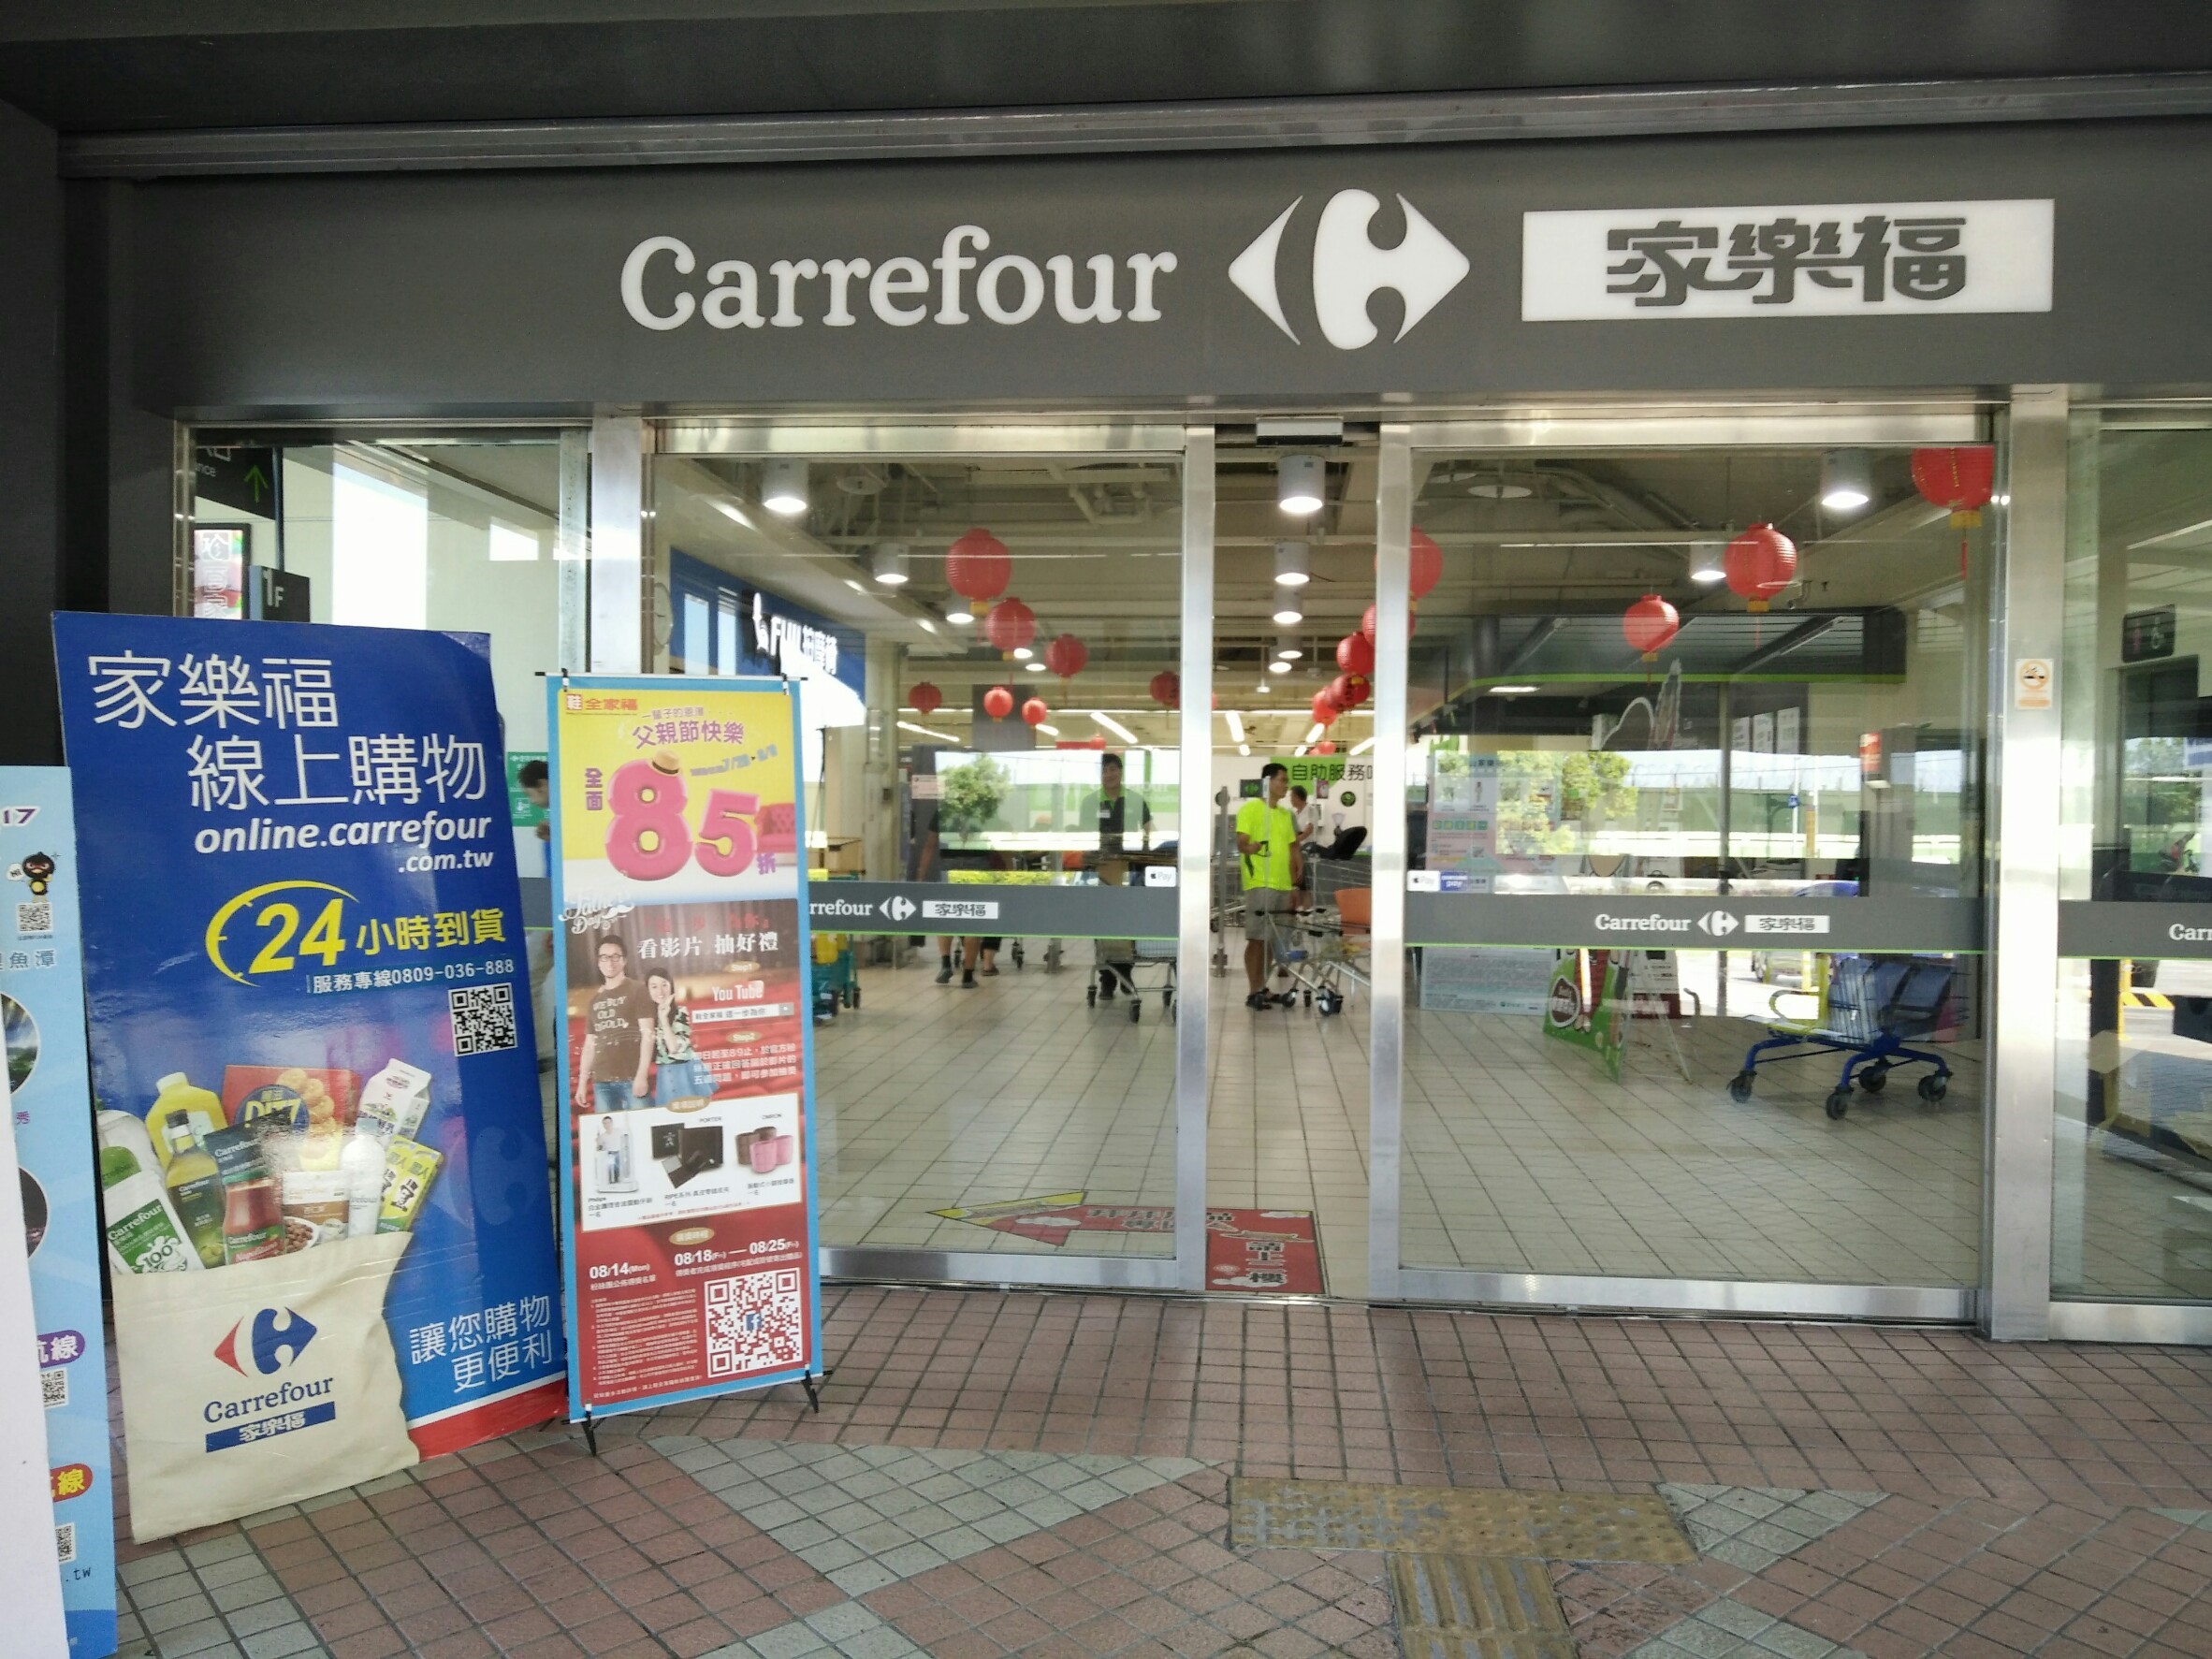 Carrefour Information Station